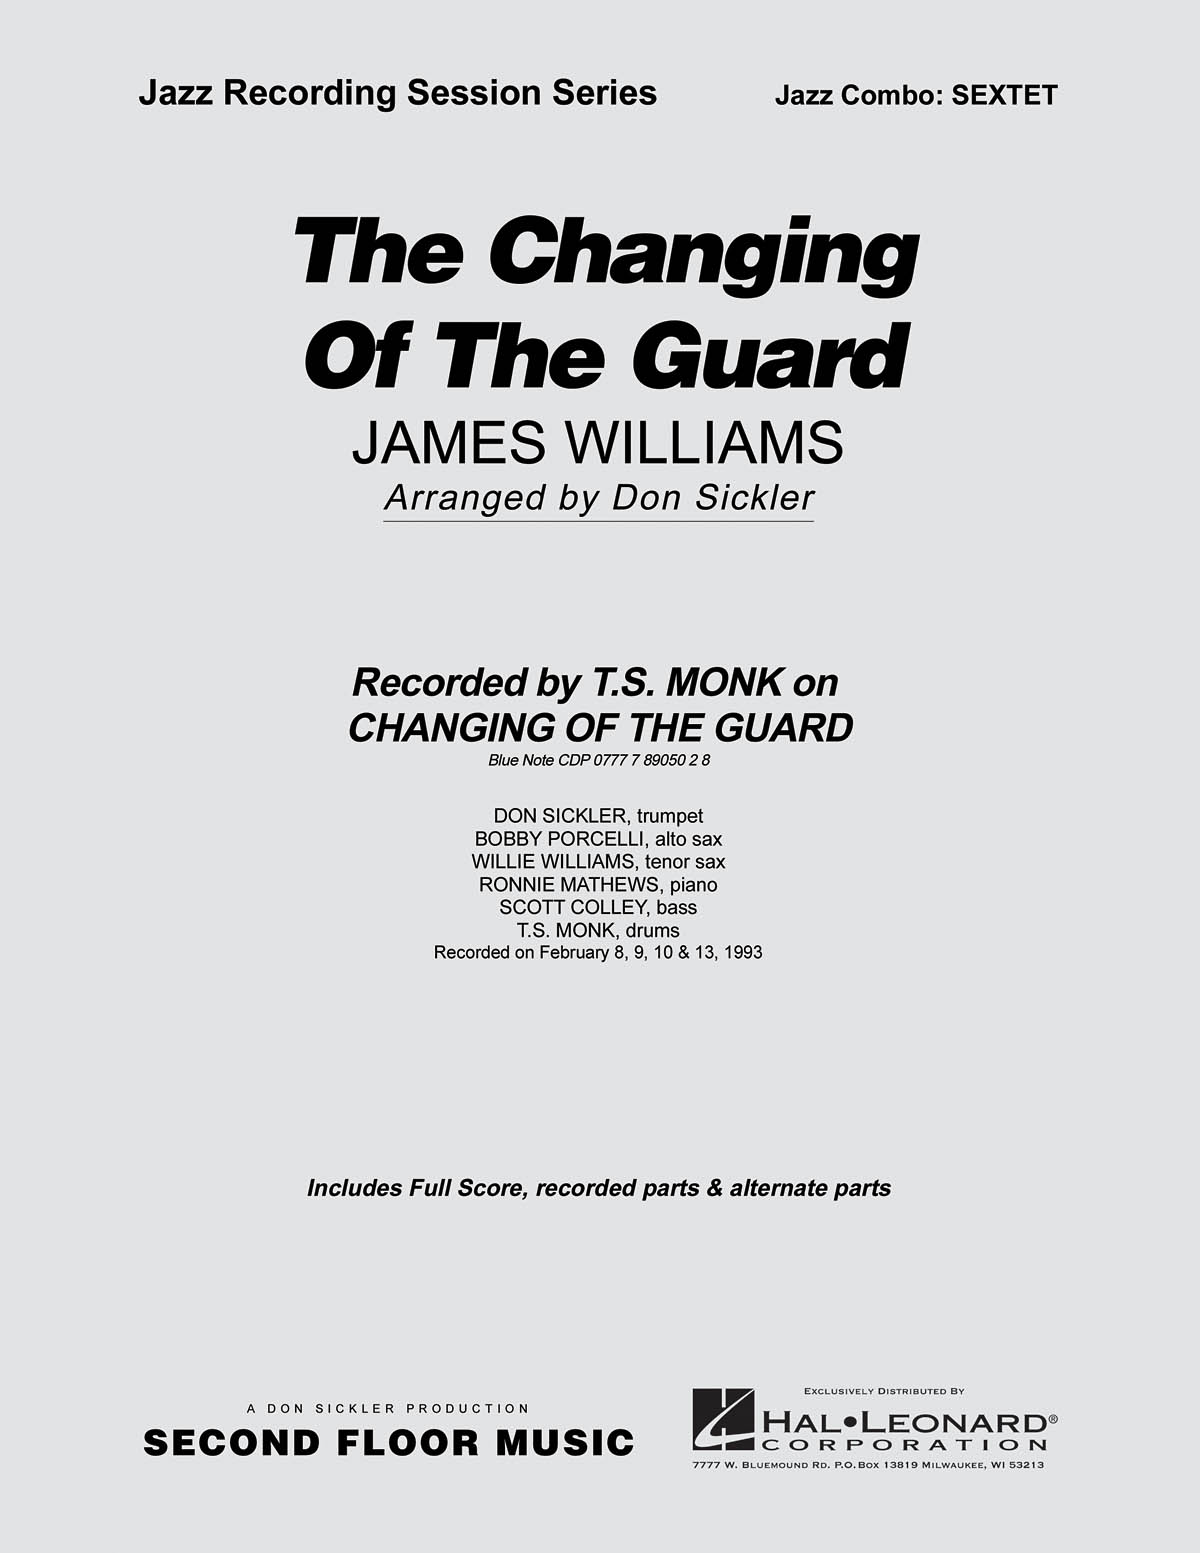 The Changing of the Guard